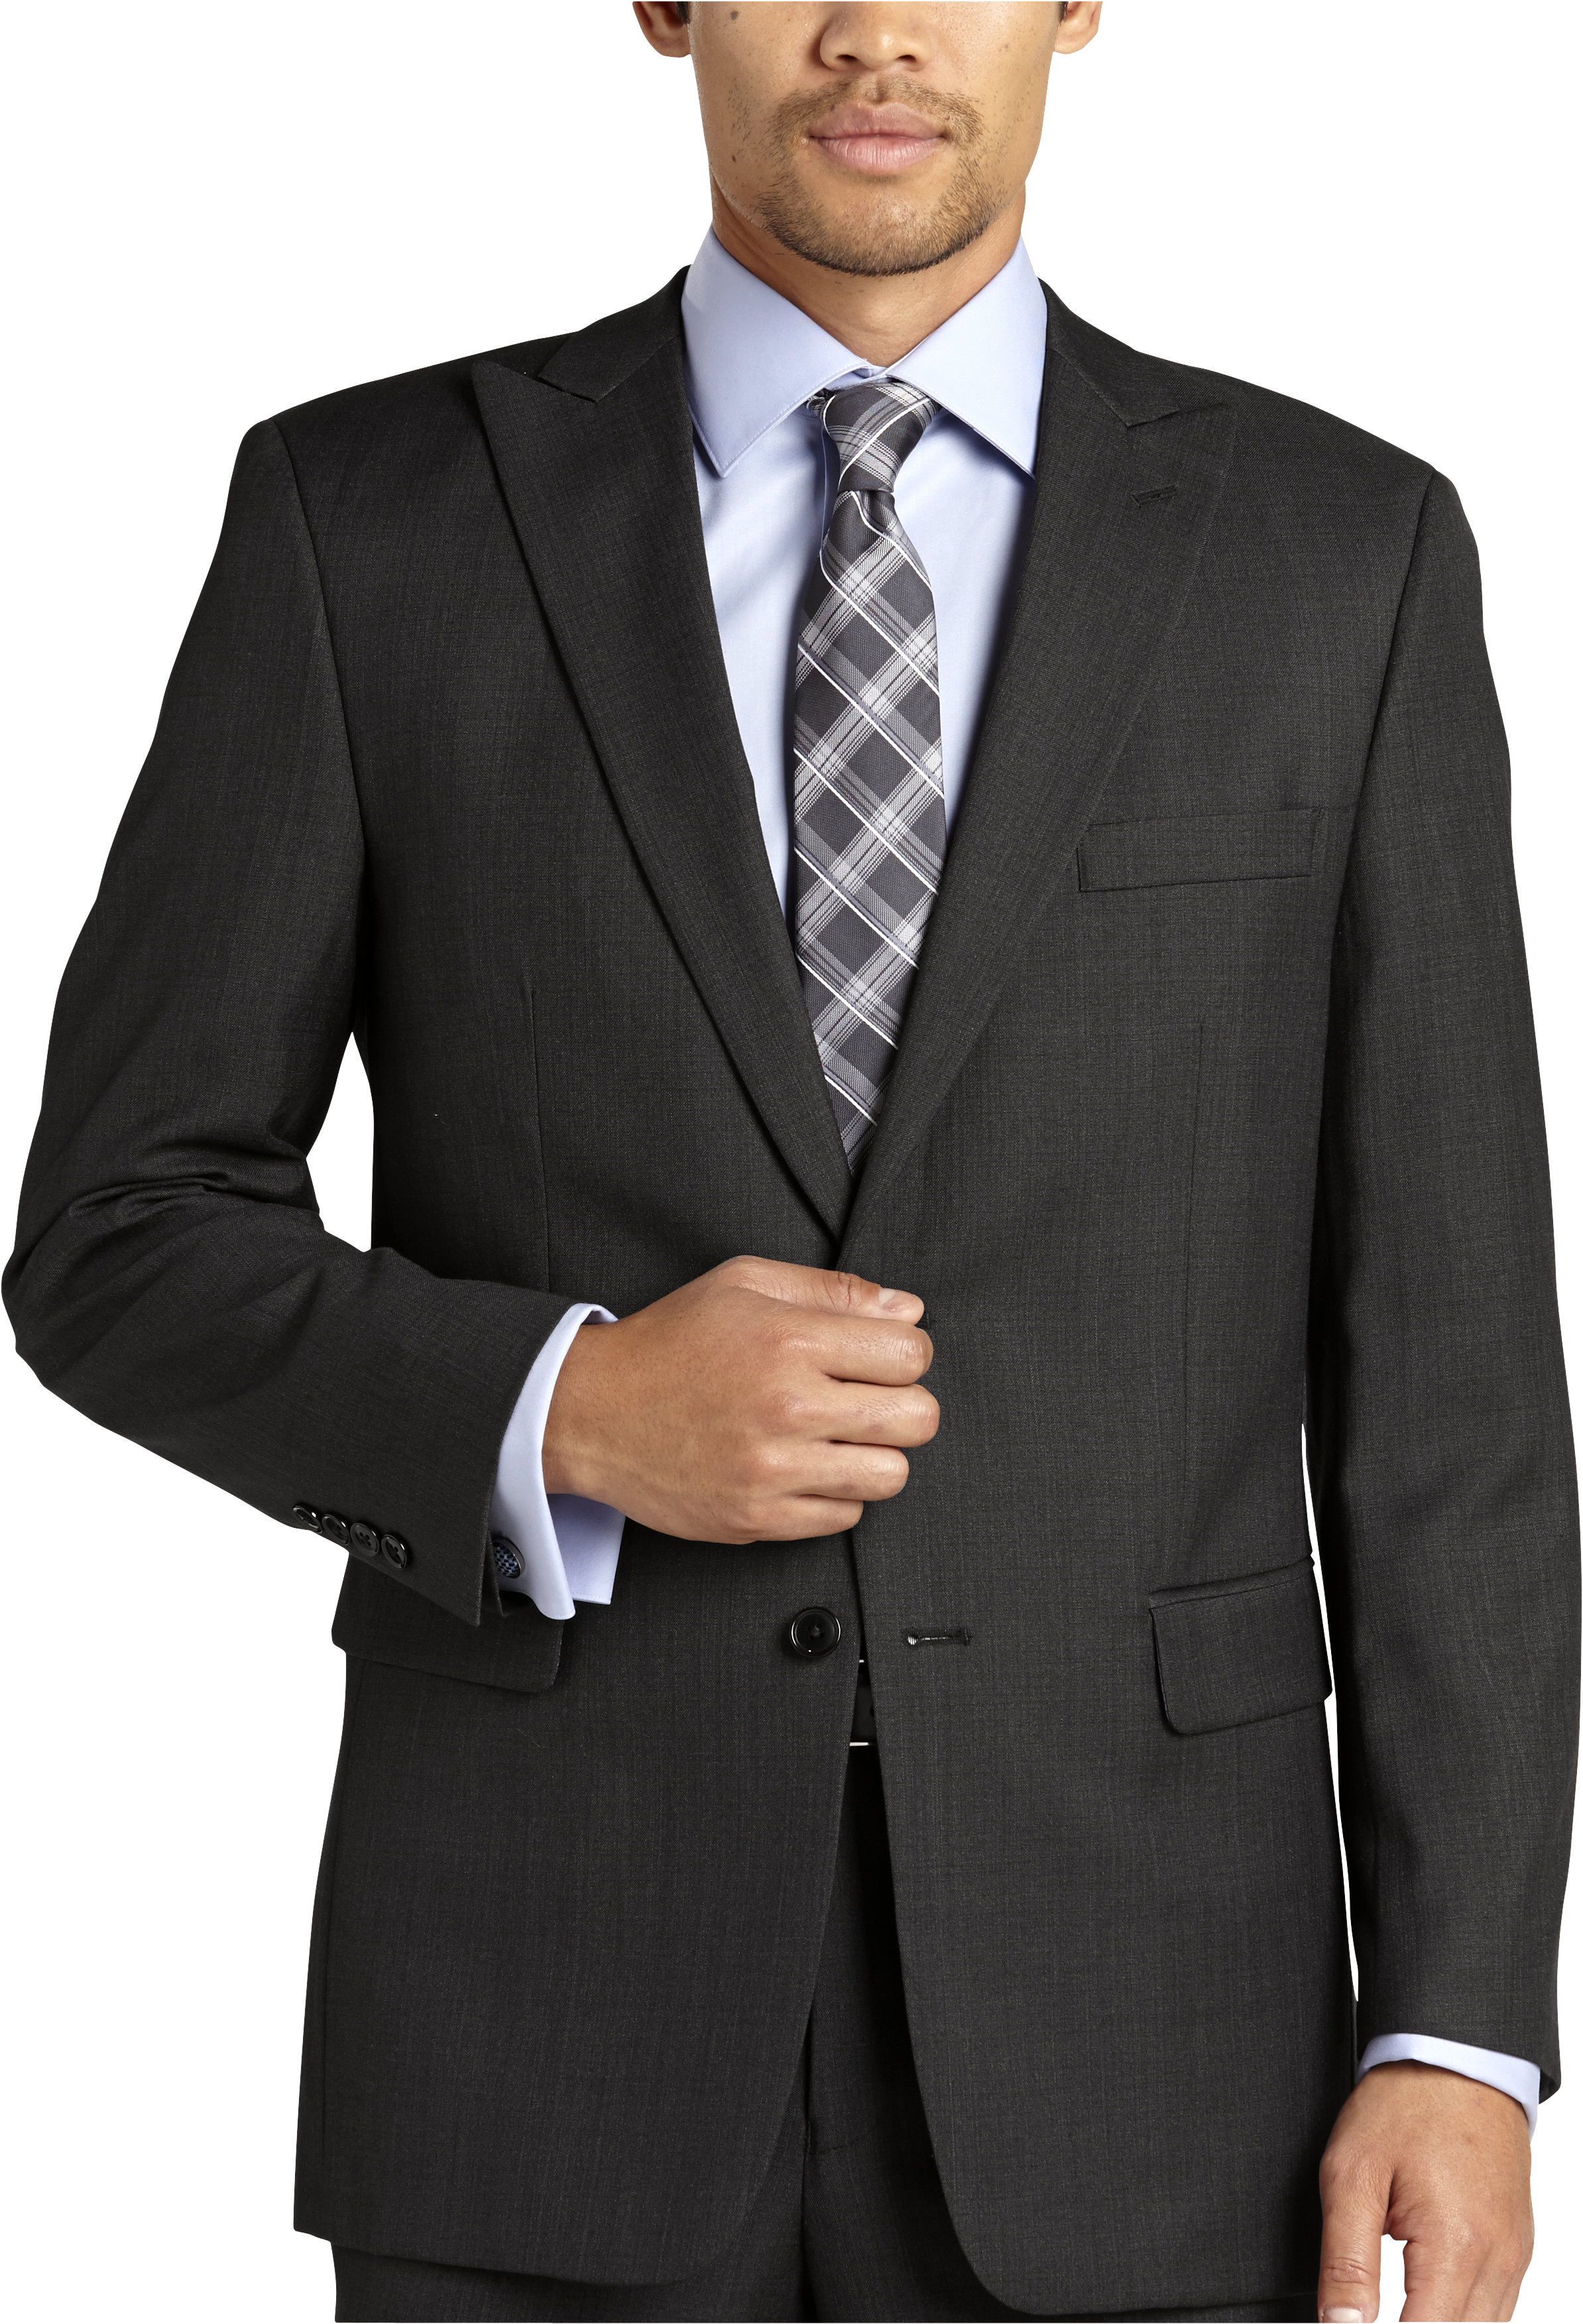 Gianfranco Ruffini Charcoal Gray Modern Fit Suit (Outlet) - Modern Fit ...